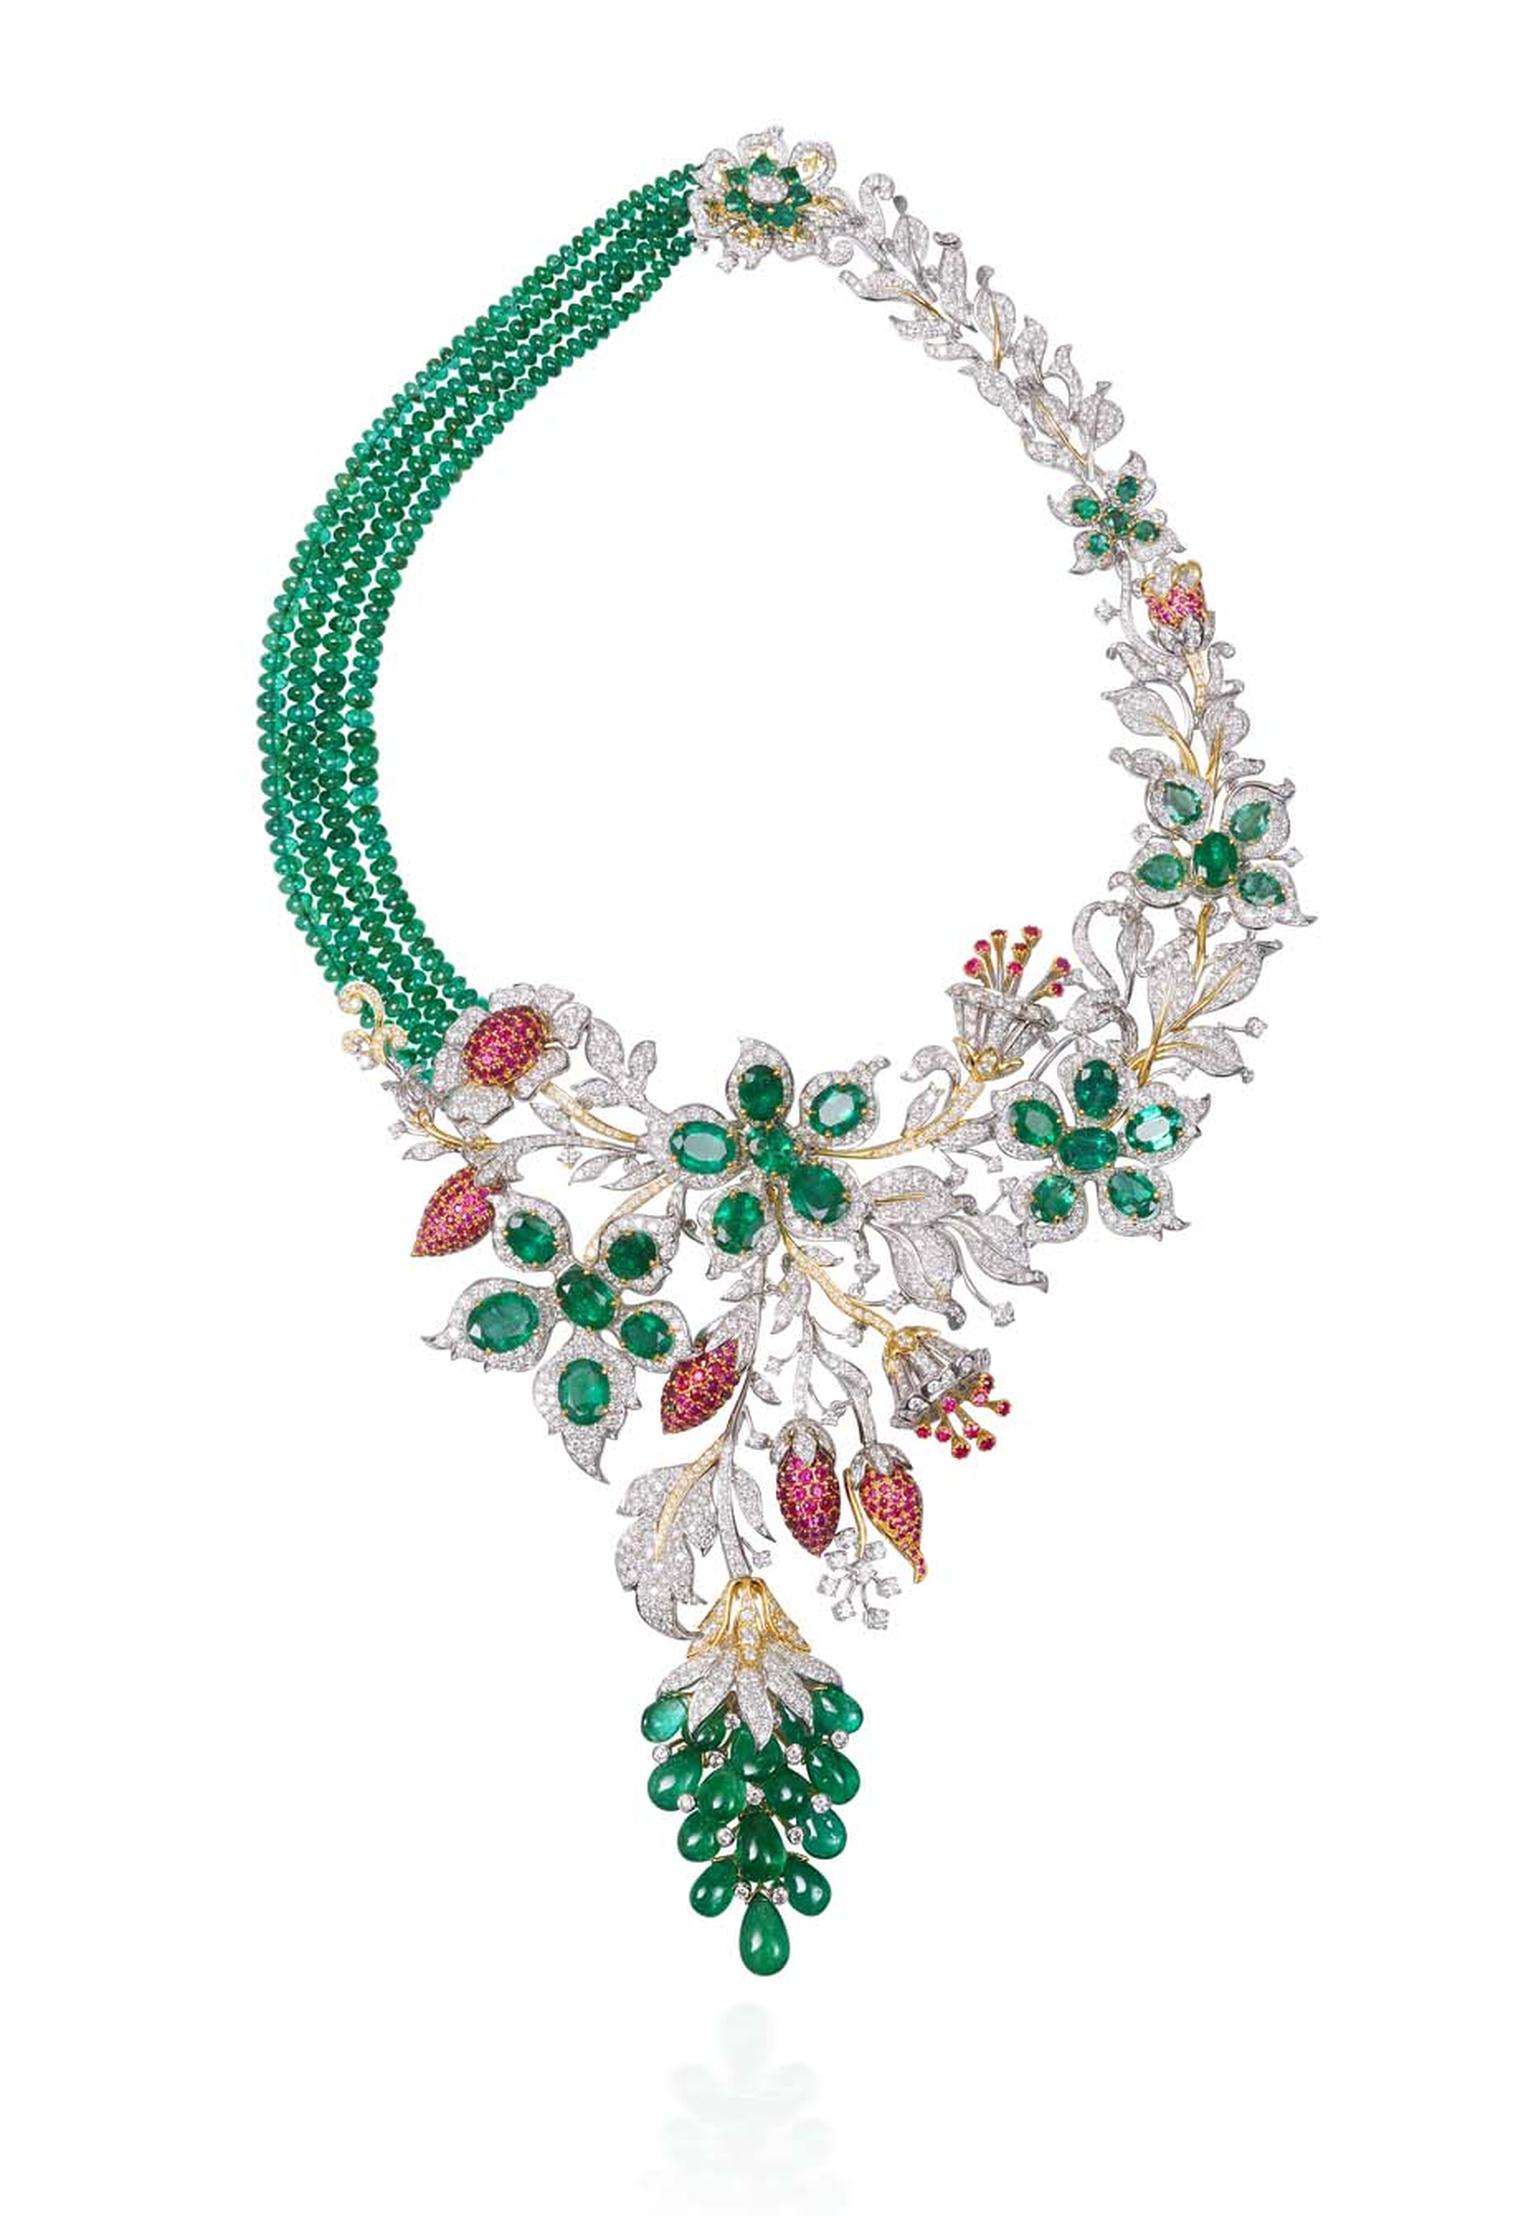 Lot 10, a necklace by Tibarumals Jewellers featuring four clustered rows of iridescent Gemfields emeralds nestled in a bed of diamonds (estimate: INR 4,600,000 - 5,550,000; $77,000 - 93,000)